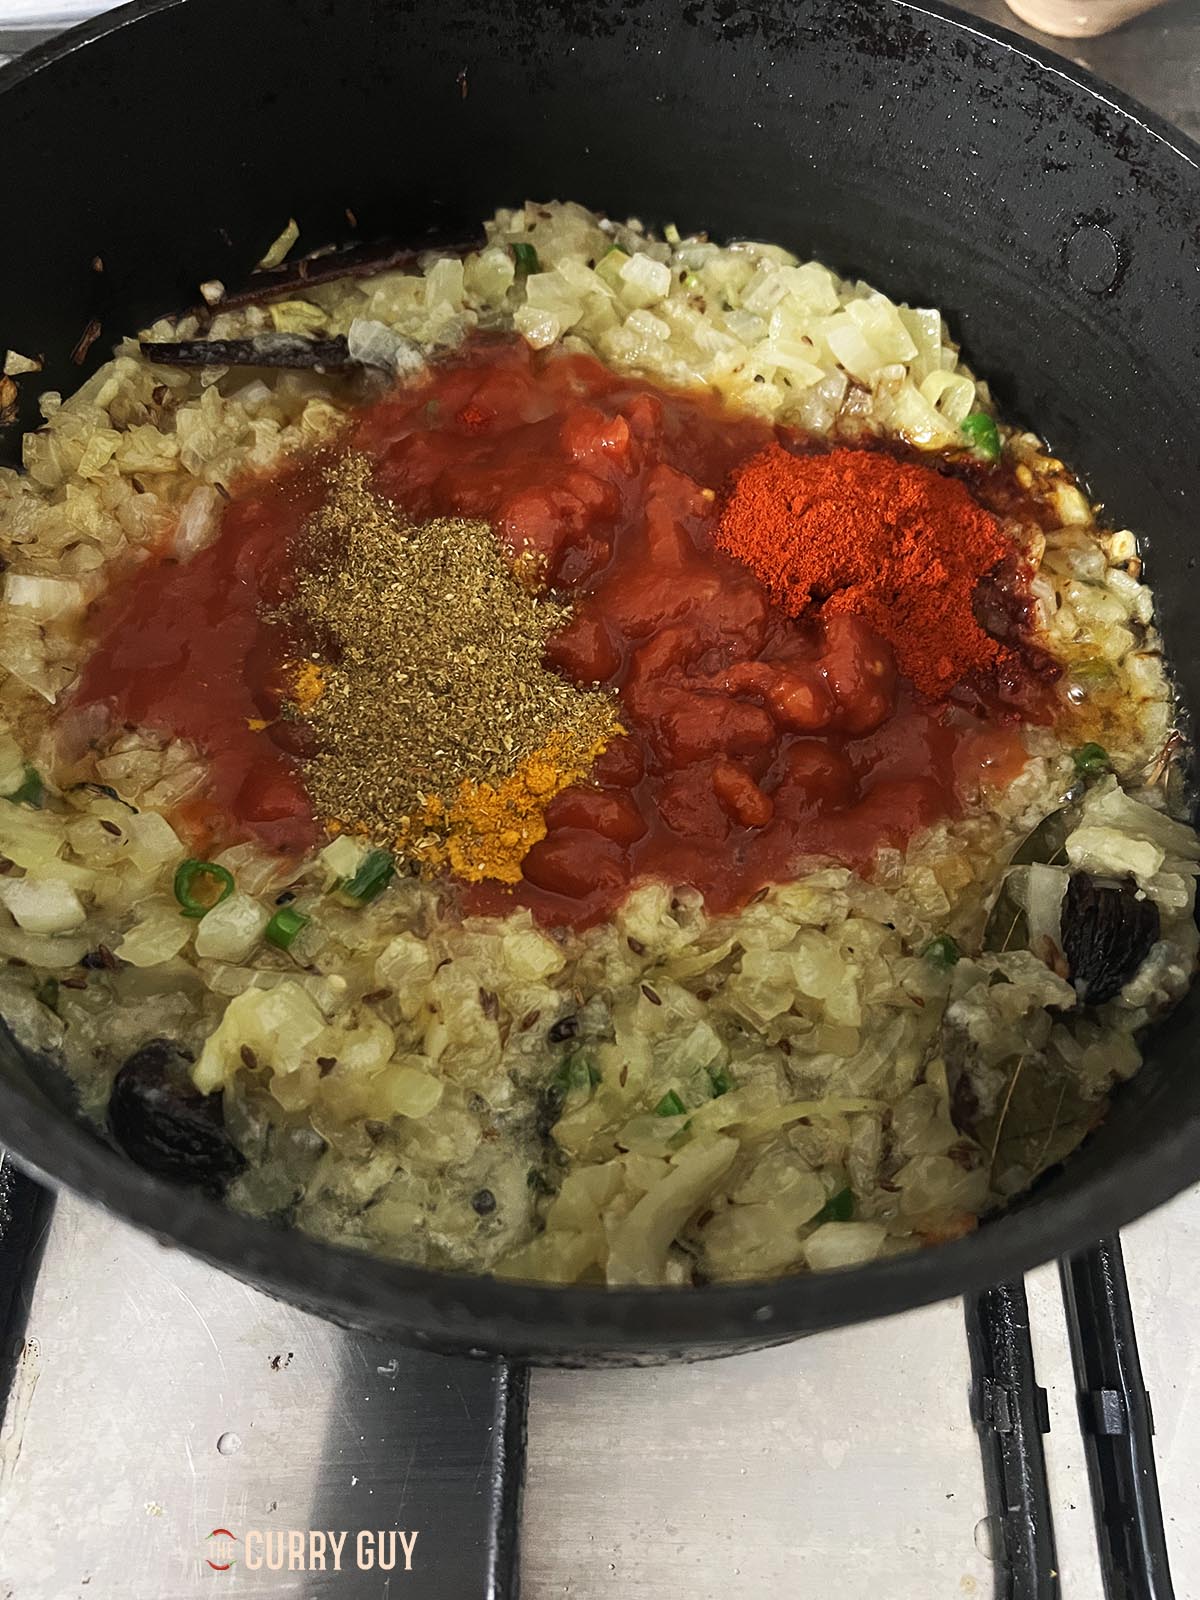 Adding the ground spices and tomatoes to the pan.